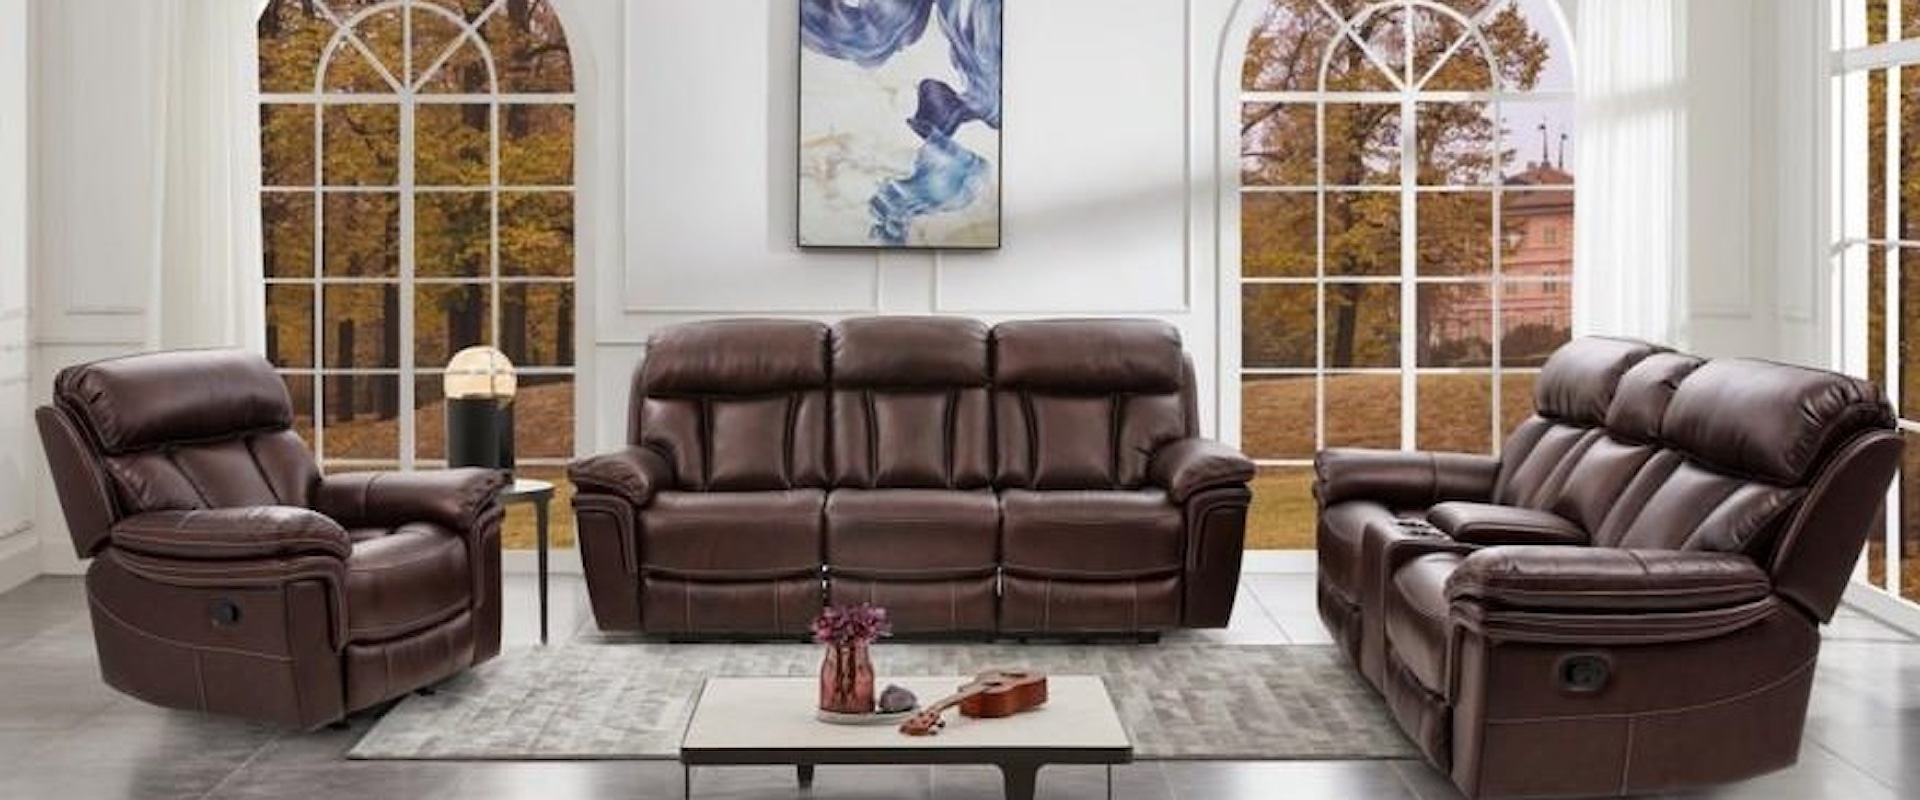 Manual Reclining Sofa, Reclining Loveseat with Center Storage Console and Recliner Set